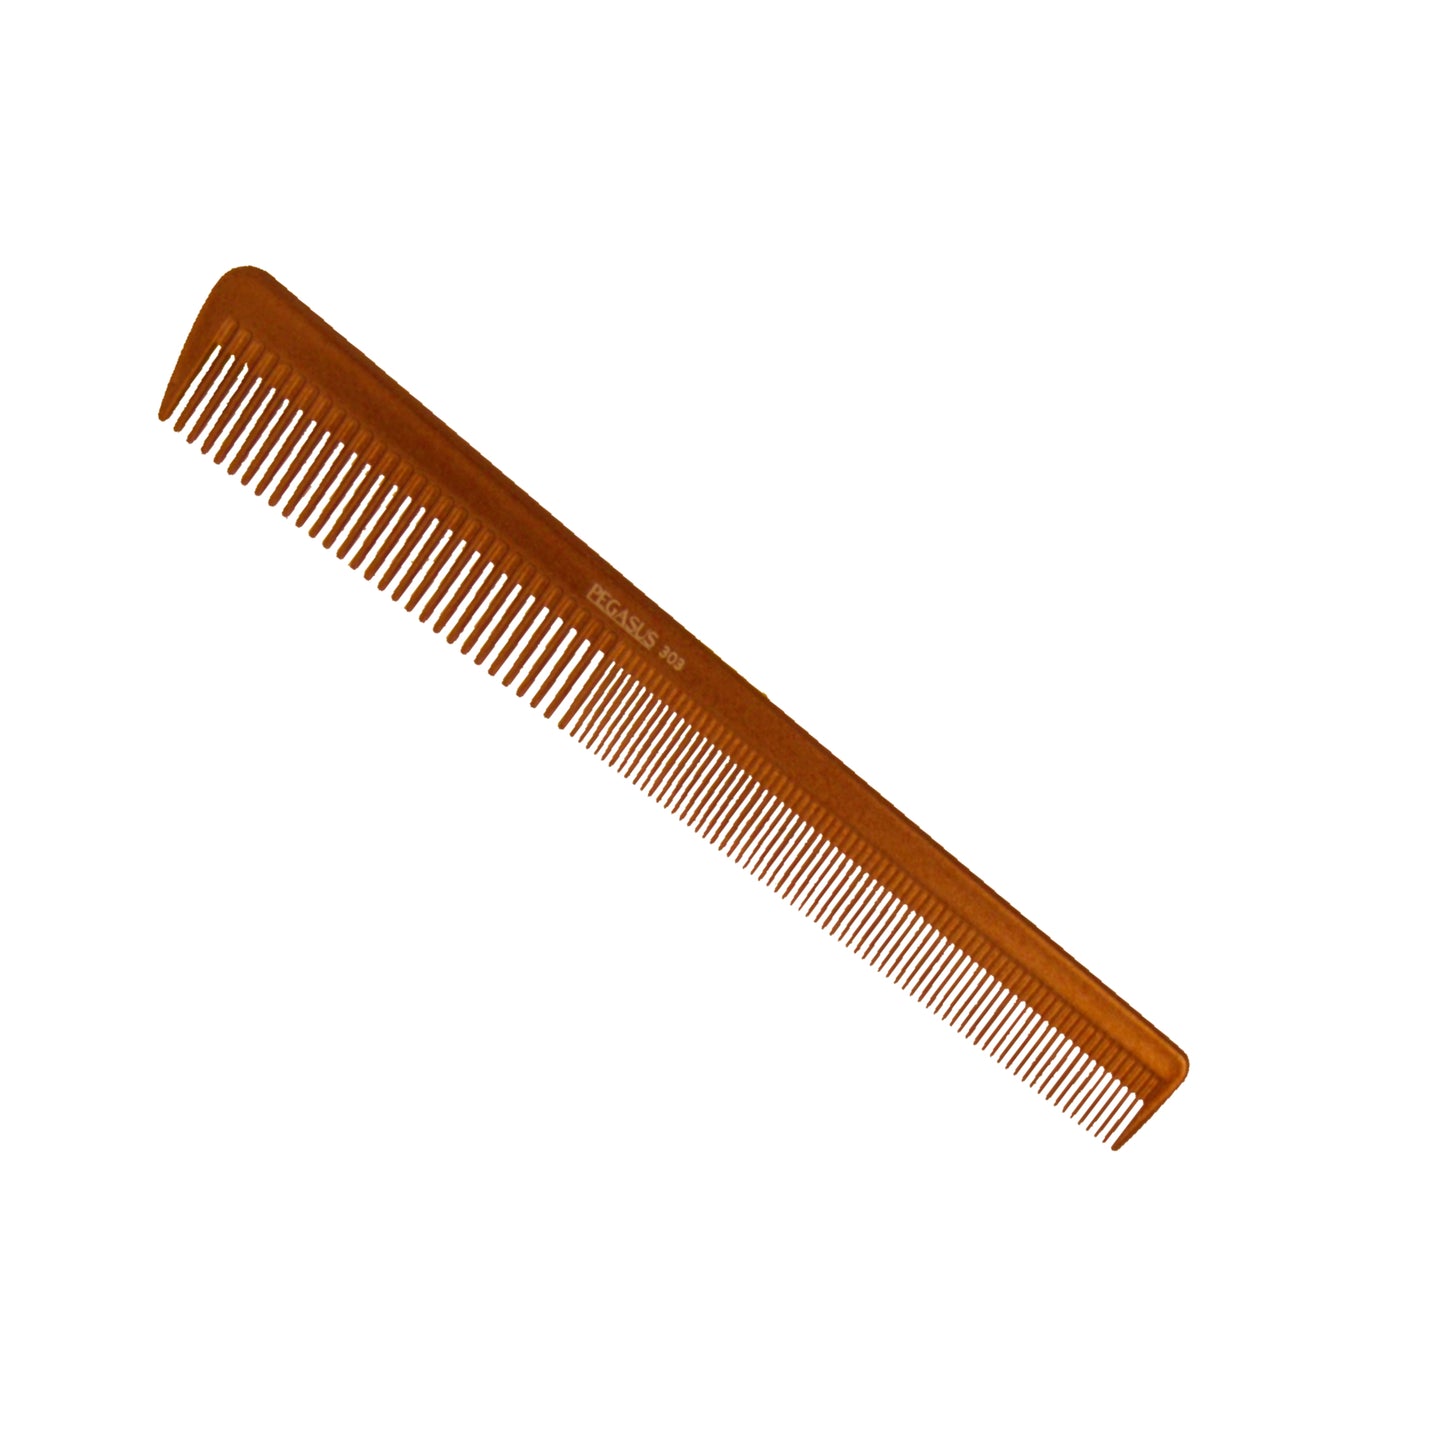 Pegasus MICOLOR 303, 6.5in Hard Rubber Heavy Barber Comb, Handmade, Seamless, Smooth Edges, Anti Static, Heat and Chemically Resistant, Wet Hair, Everyday Grooming Comb | Peines de goma dura - Gold